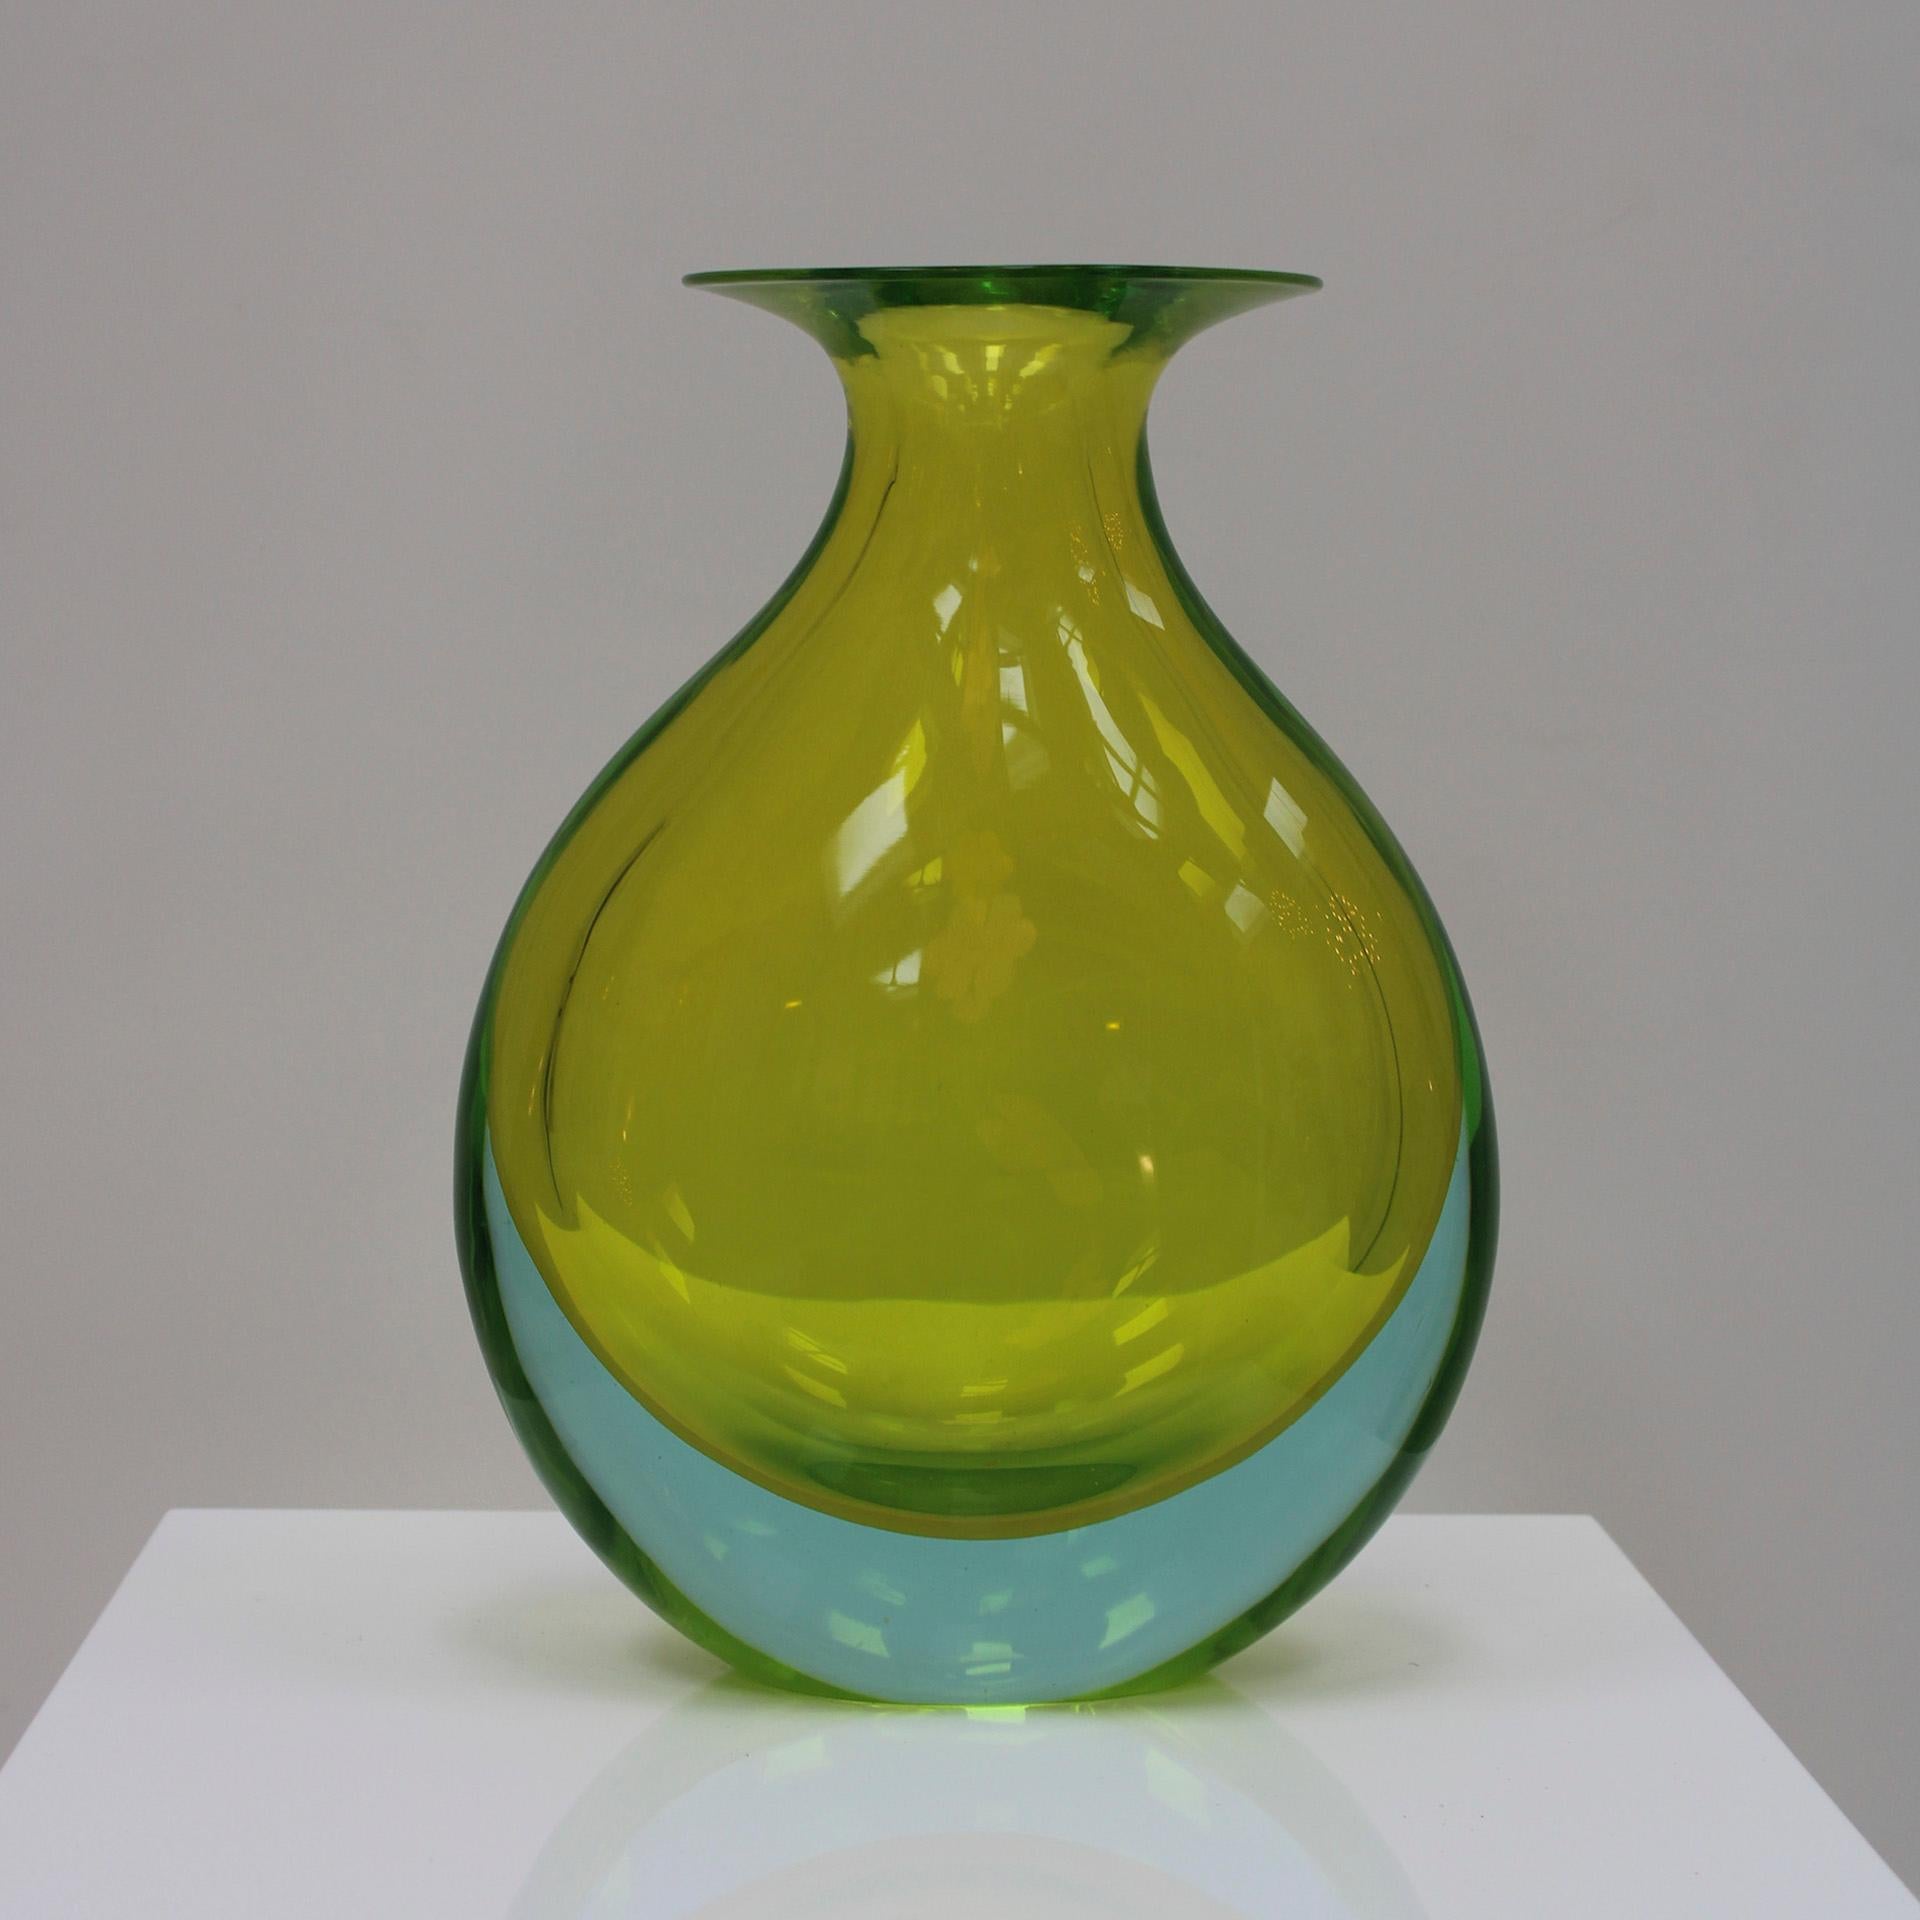 Italian Mid-Century Modern Yellow Blue Sommerso Murano Glass Vase by Flavio Poli 1950 For Sale